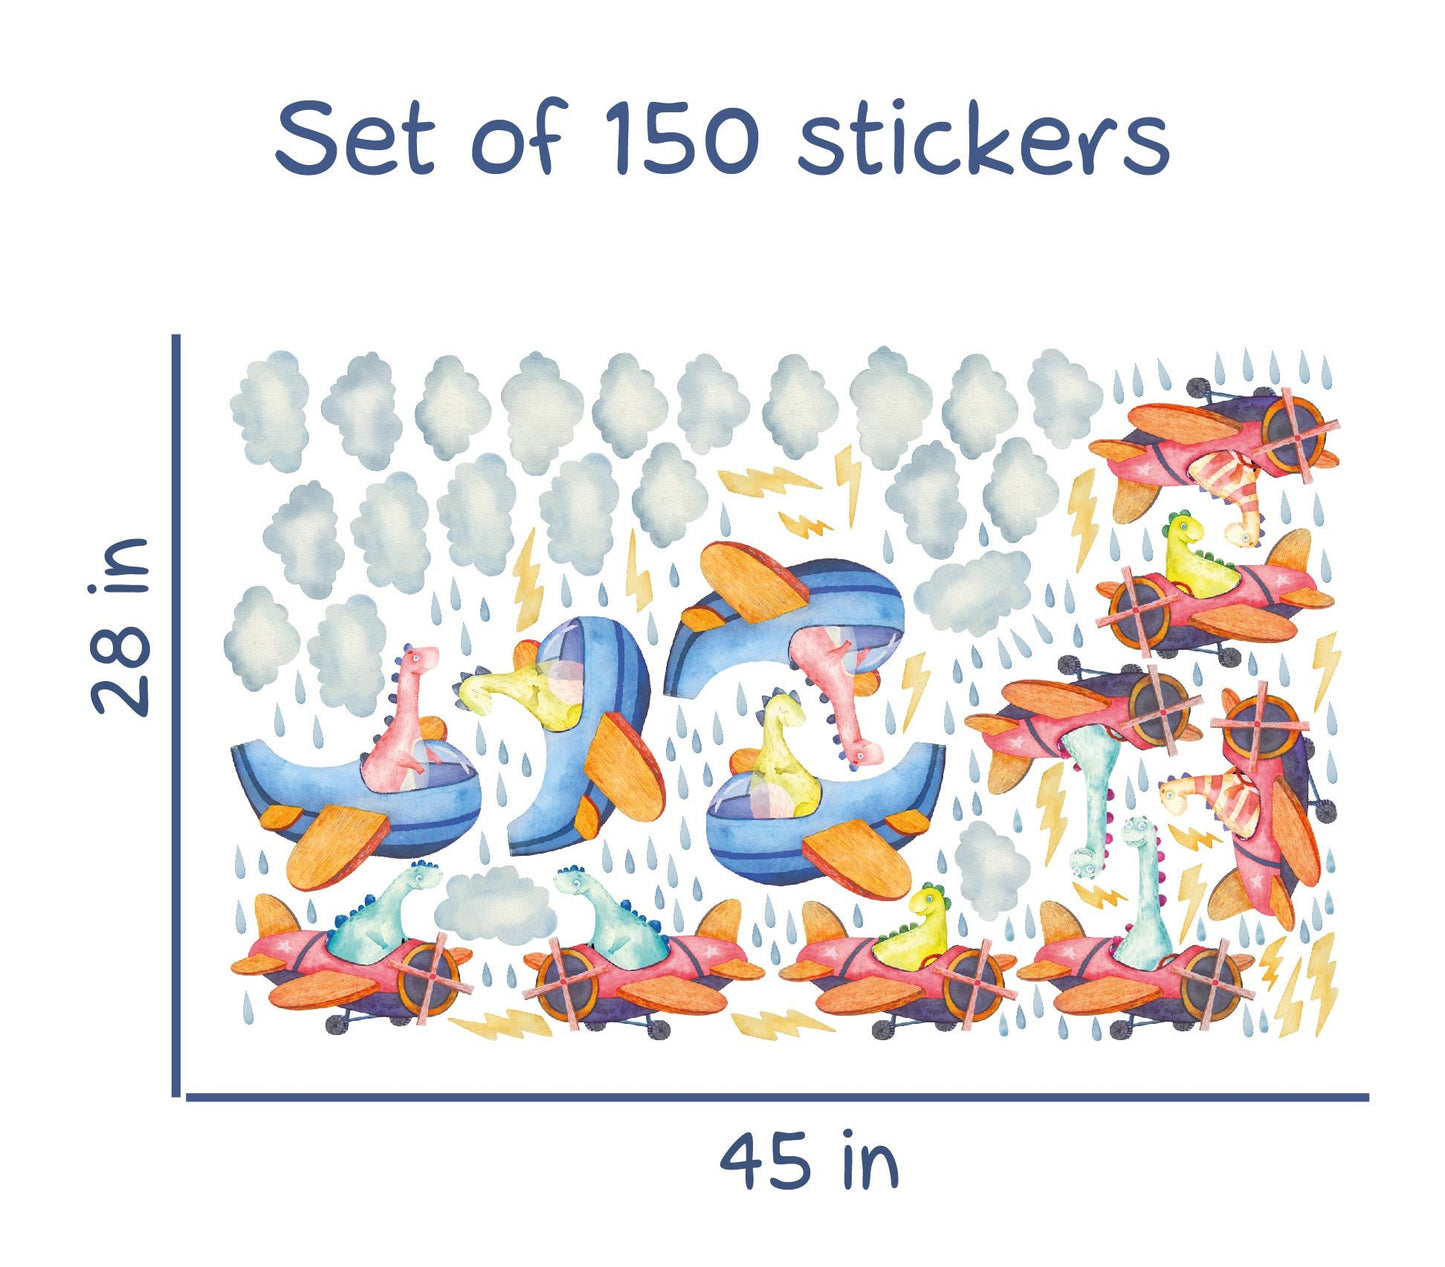 Dinosaurs Wall Stickers airplanes Decals clouds raindrops, KL 0028